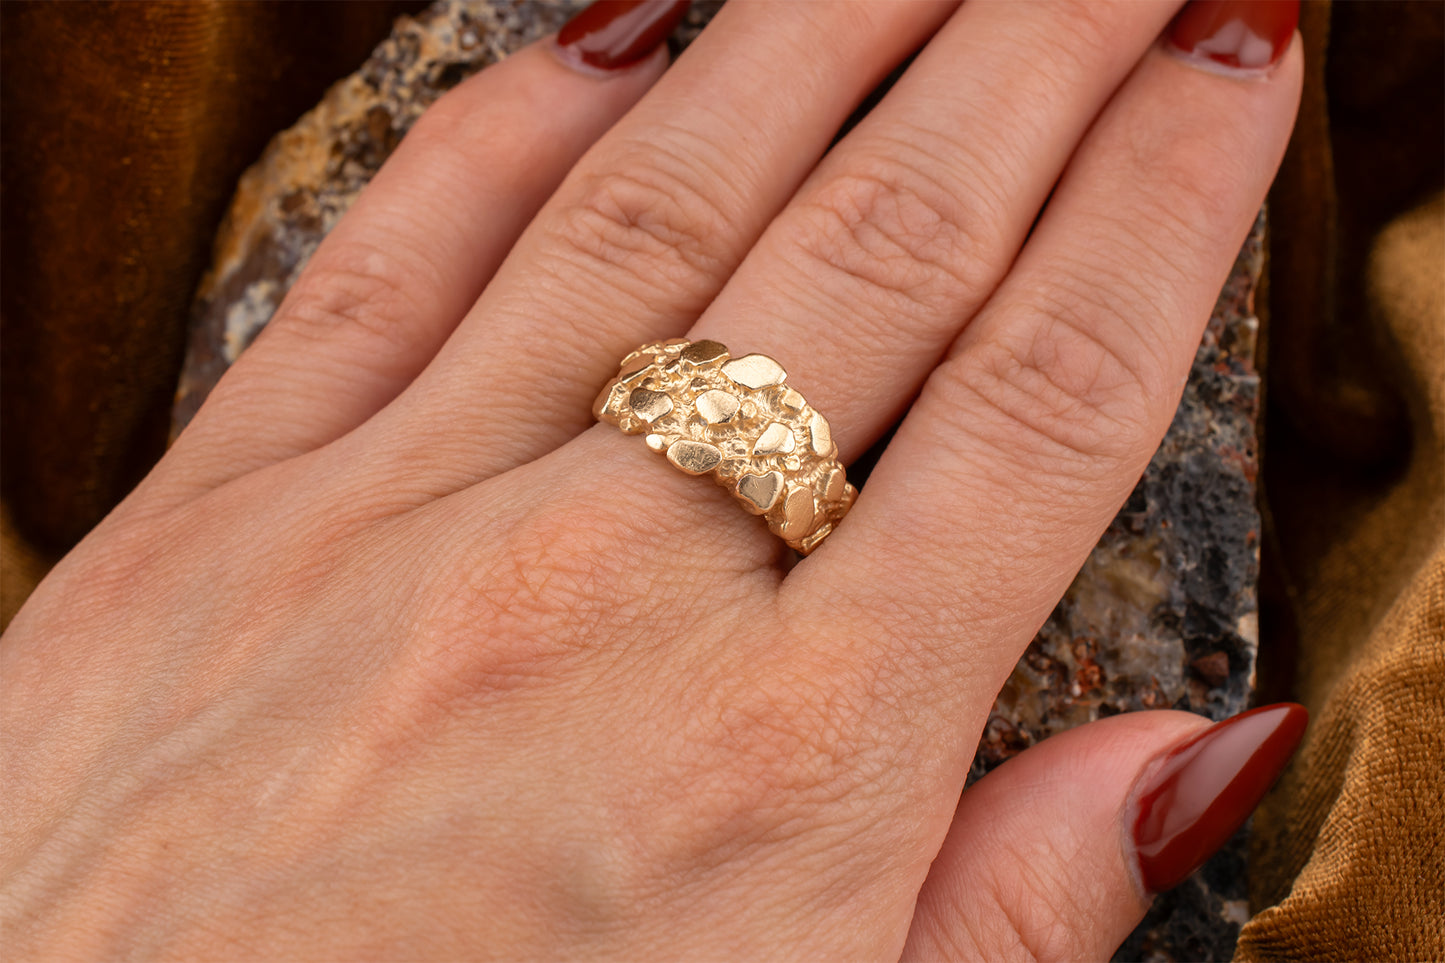 Unisex Vintage 14KT Yellow Gold Chunky Nugget Ring Size 8 1/2 Circa 80s